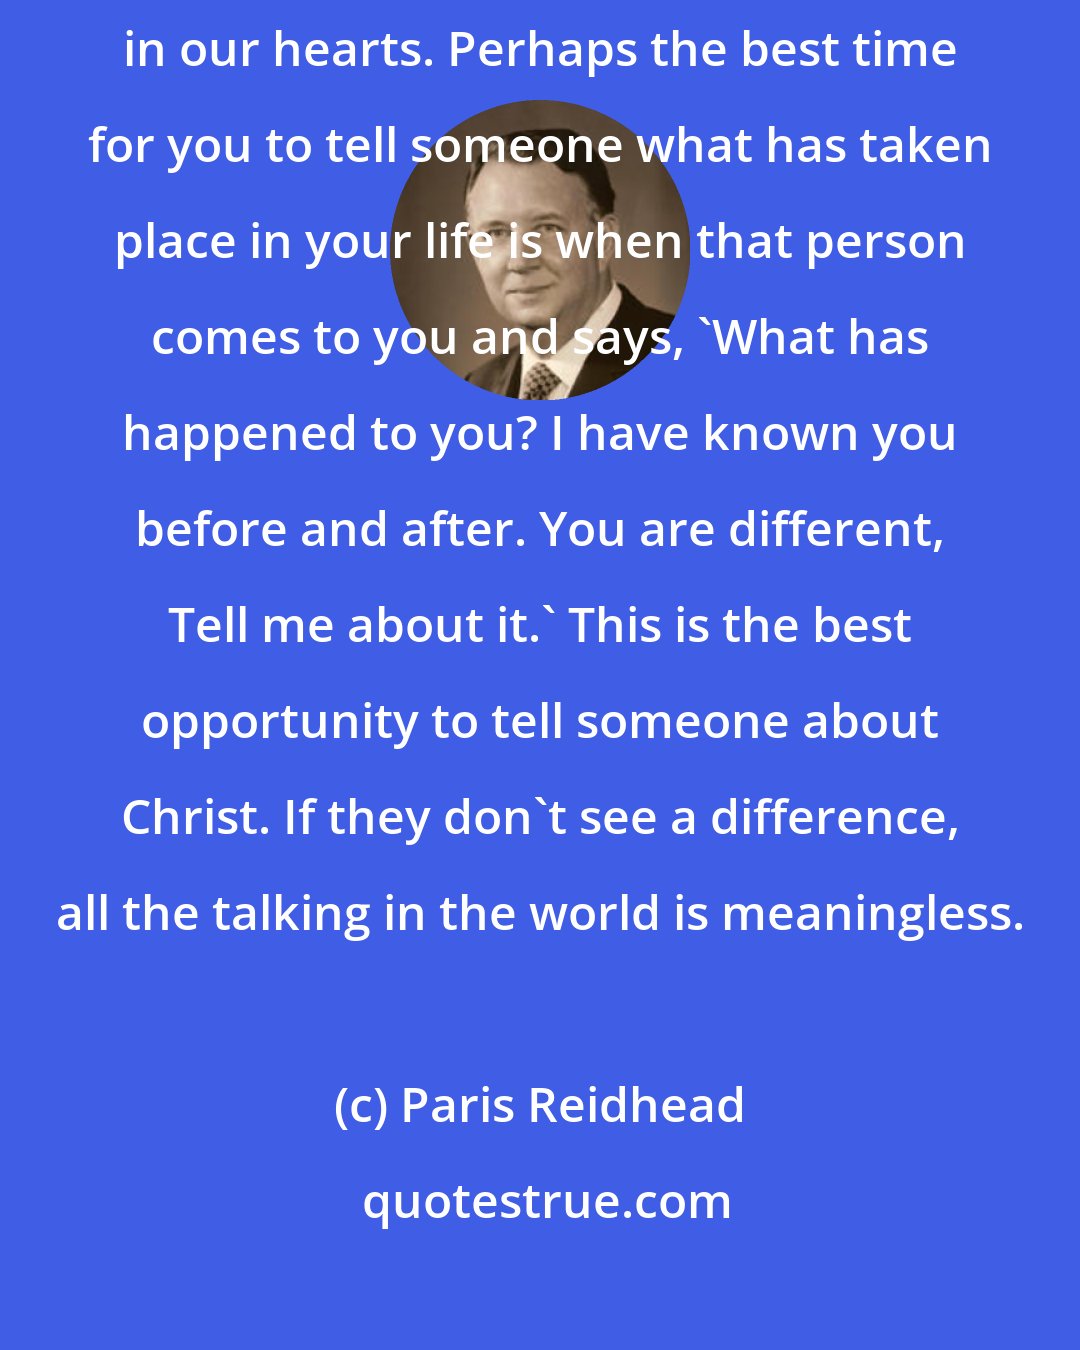 Paris Reidhead: We who are born from above testify to the change that God has wrought in our hearts. Perhaps the best time for you to tell someone what has taken place in your life is when that person comes to you and says, 'What has happened to you? I have known you before and after. You are different, Tell me about it.' This is the best opportunity to tell someone about Christ. If they don't see a difference, all the talking in the world is meaningless.